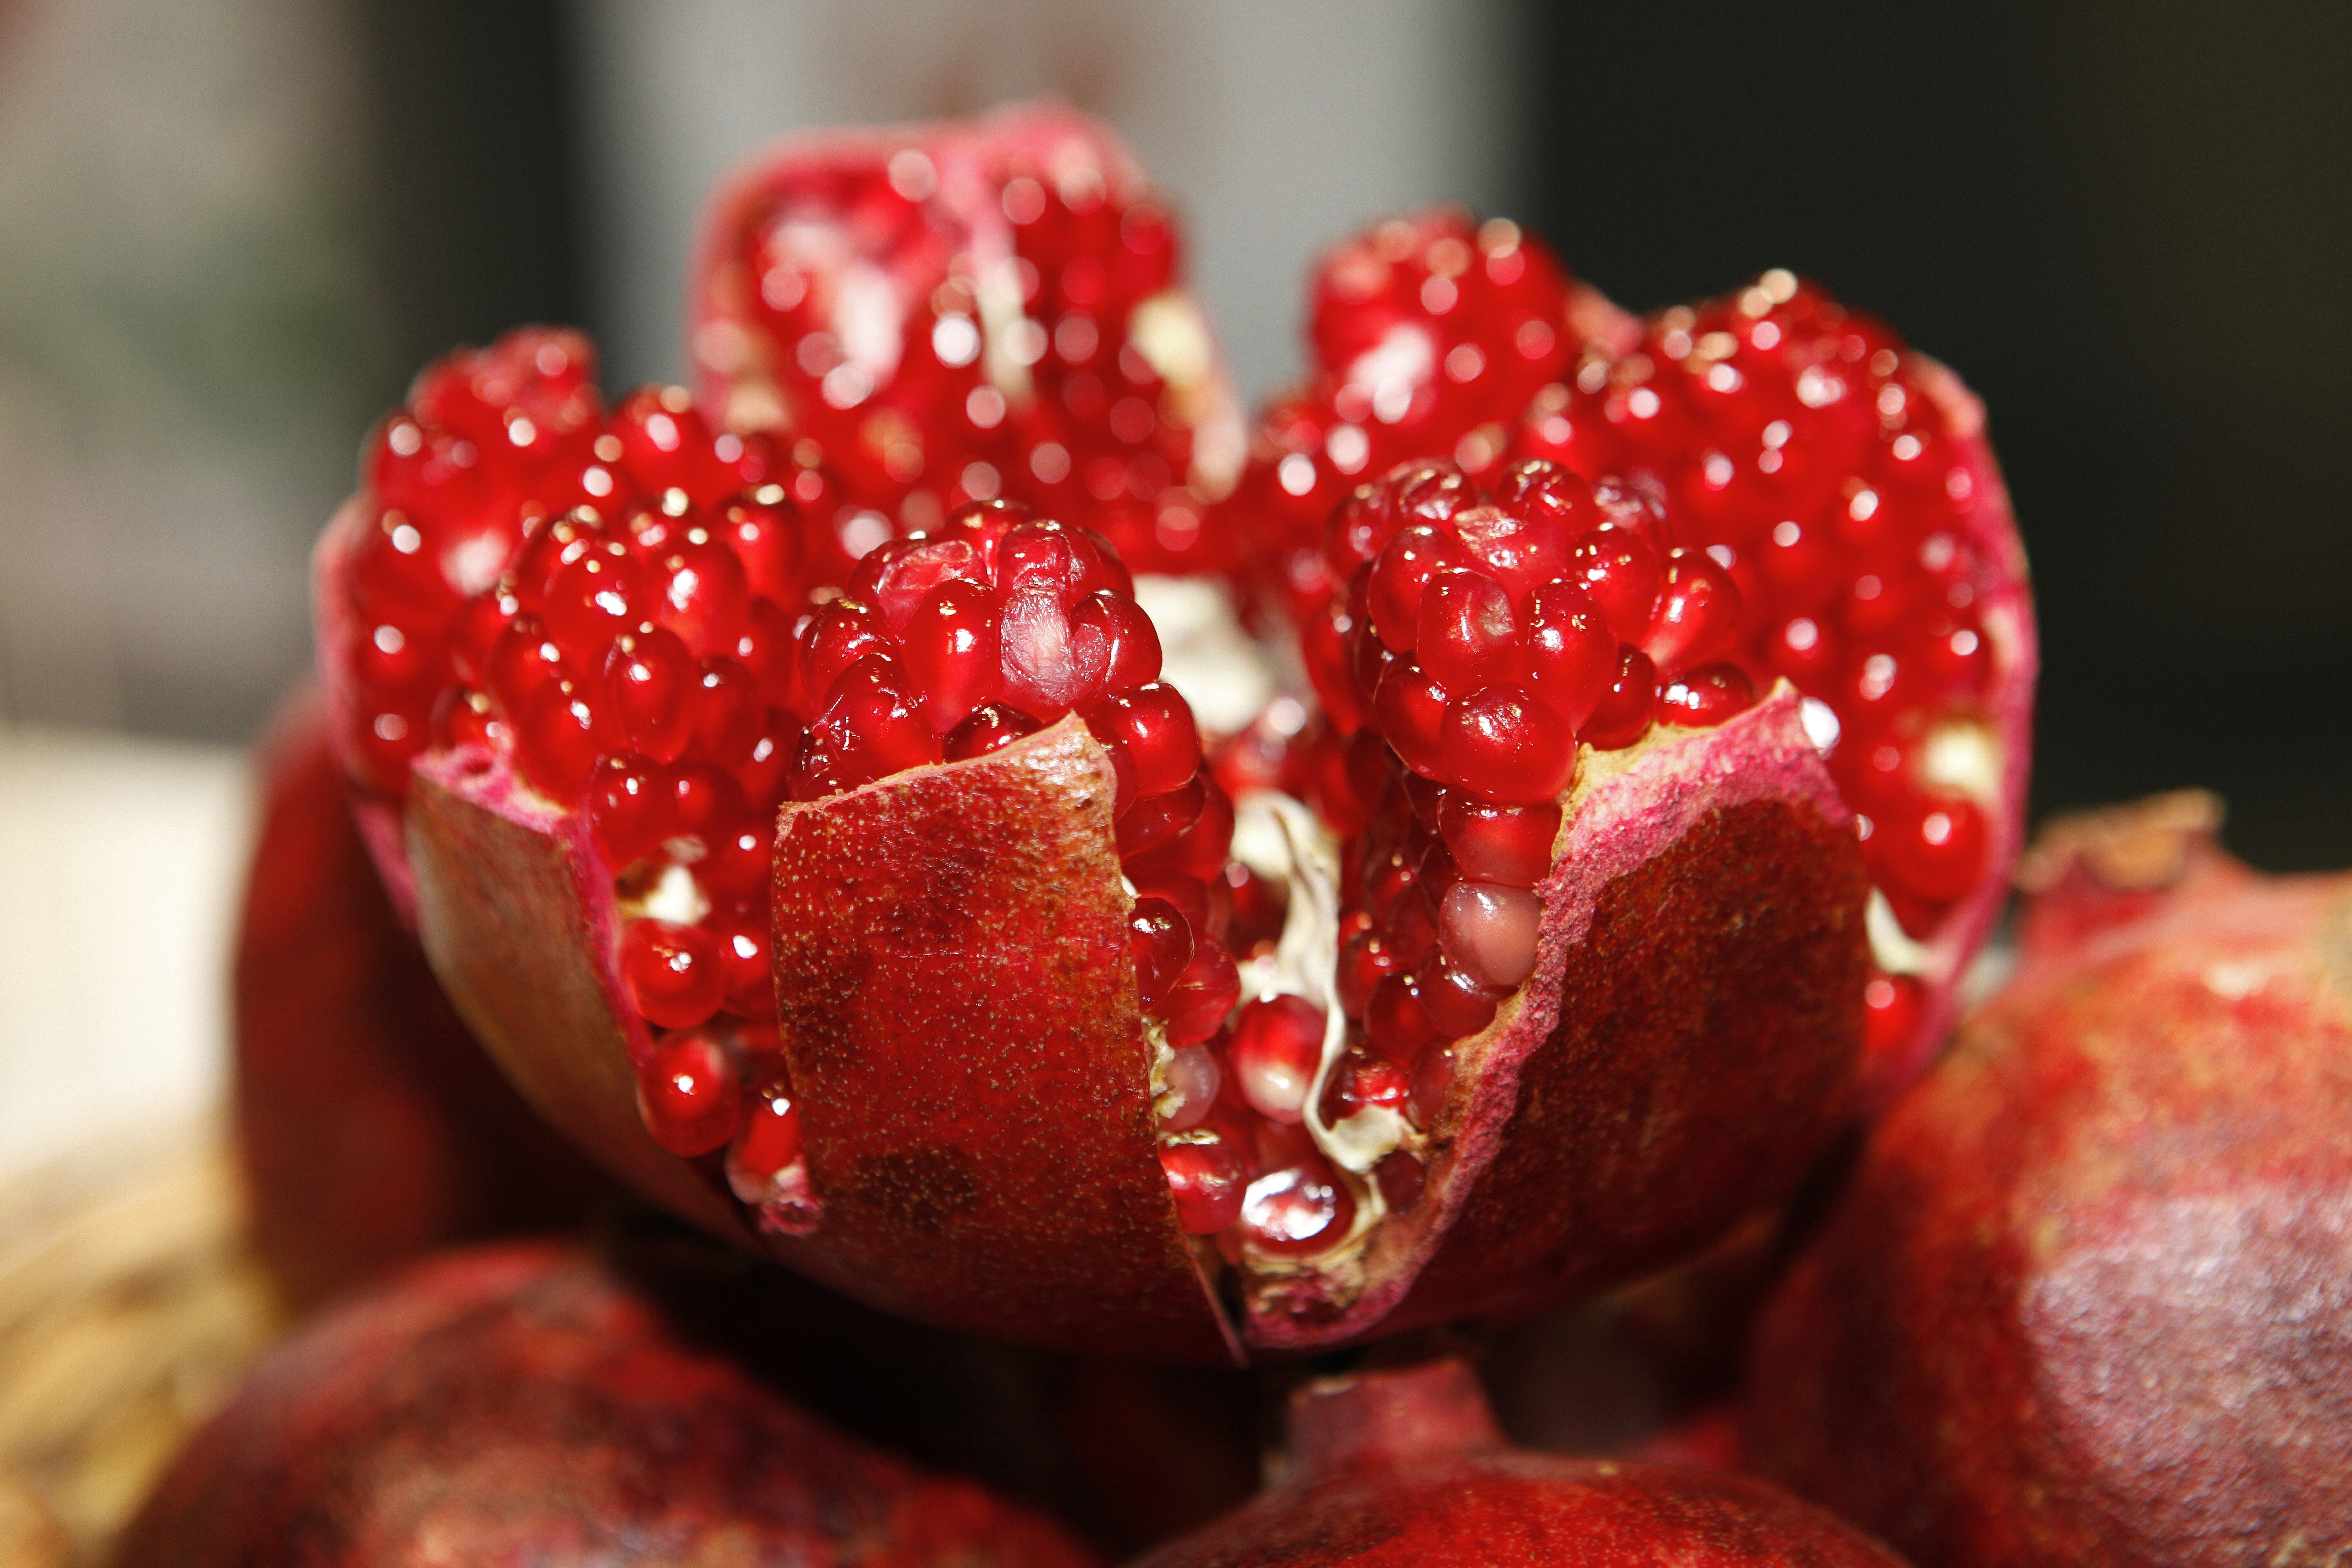 How To Clean Your Arteries With One Simple Fruit - Pomegranate!